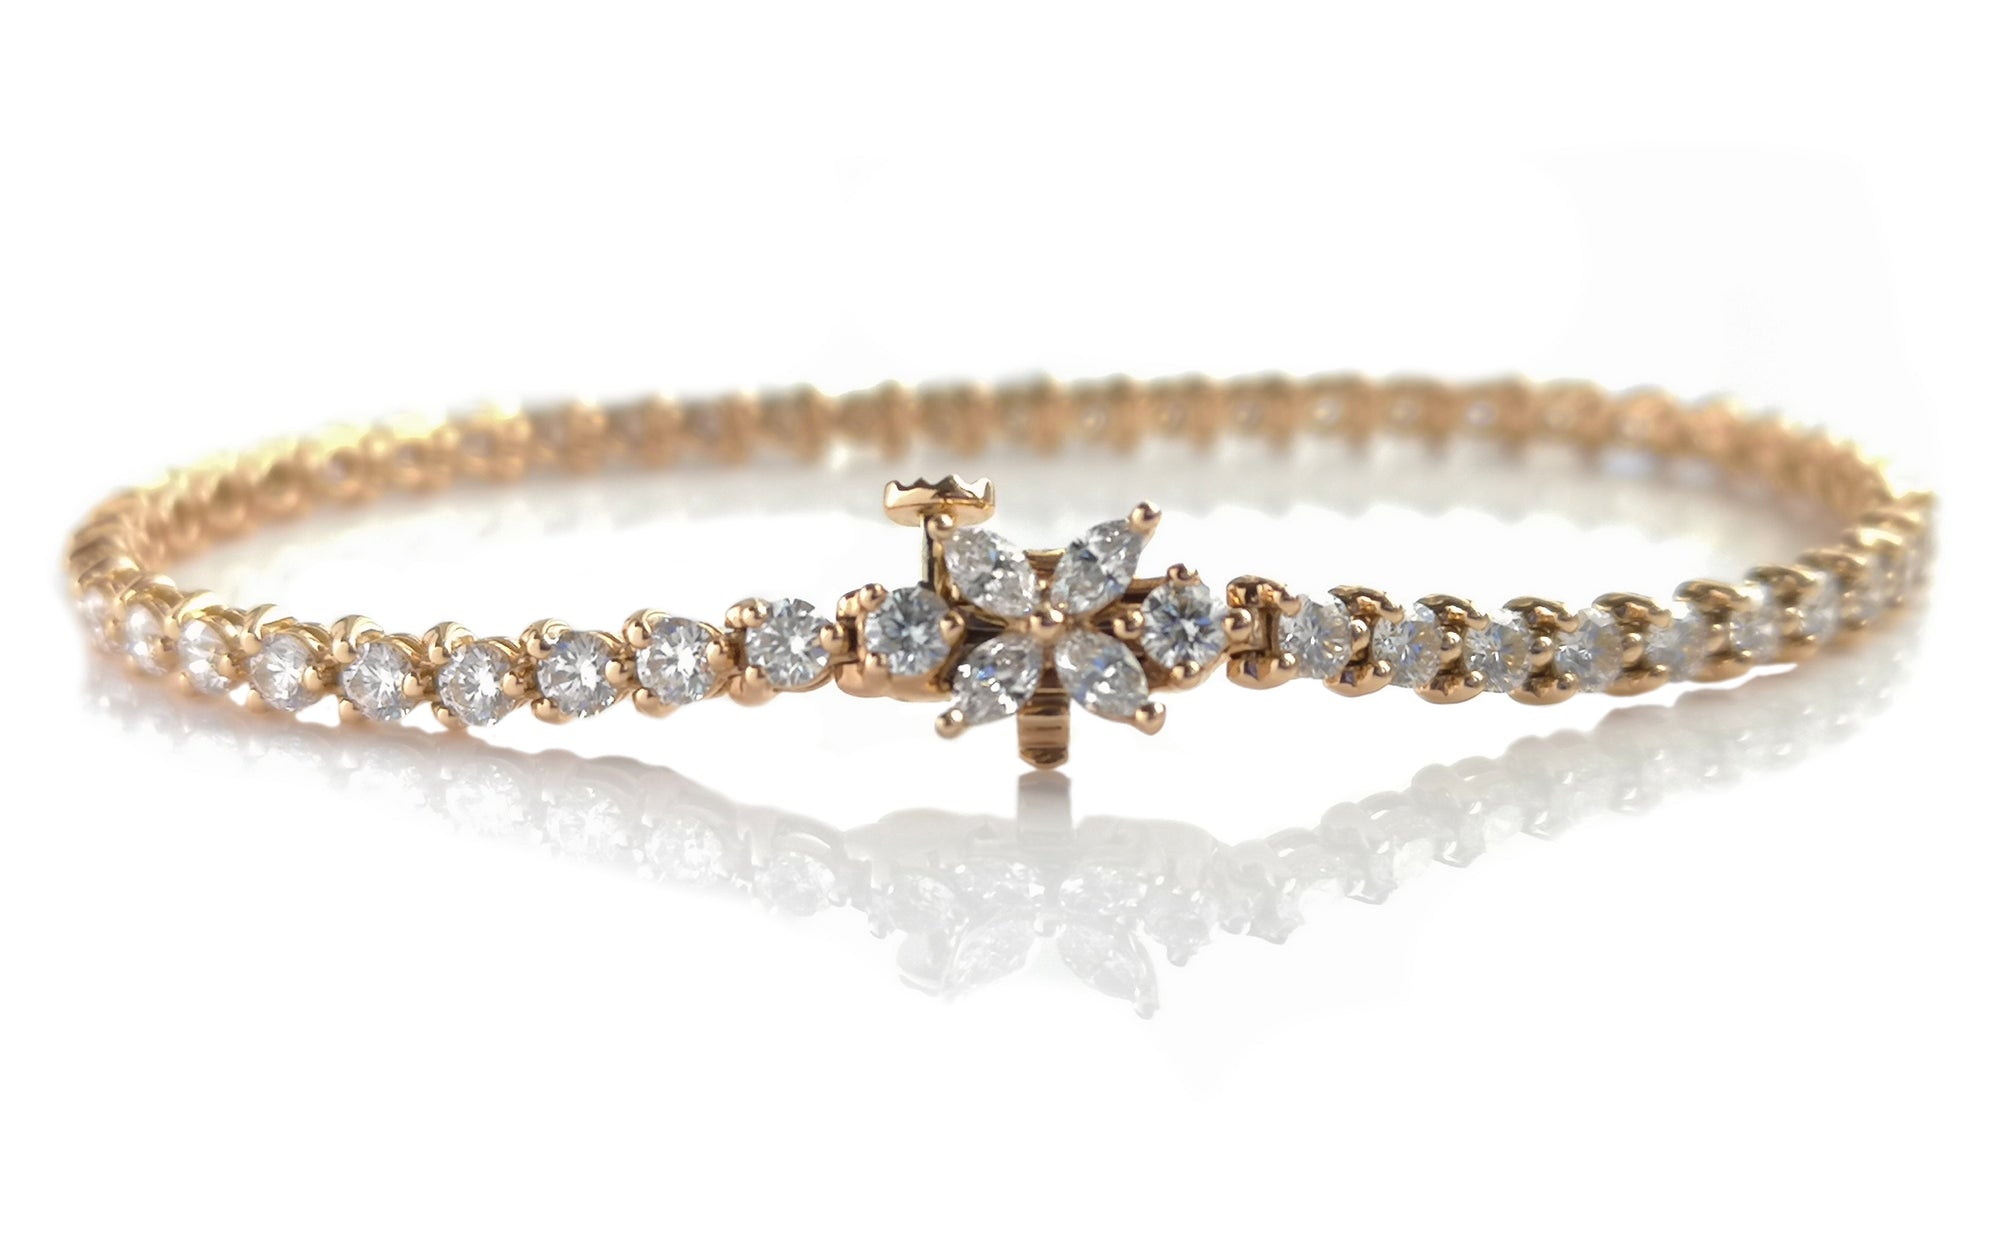 Tiffany Victoria Tennis Bracelet in Rose Gold with Diamonds